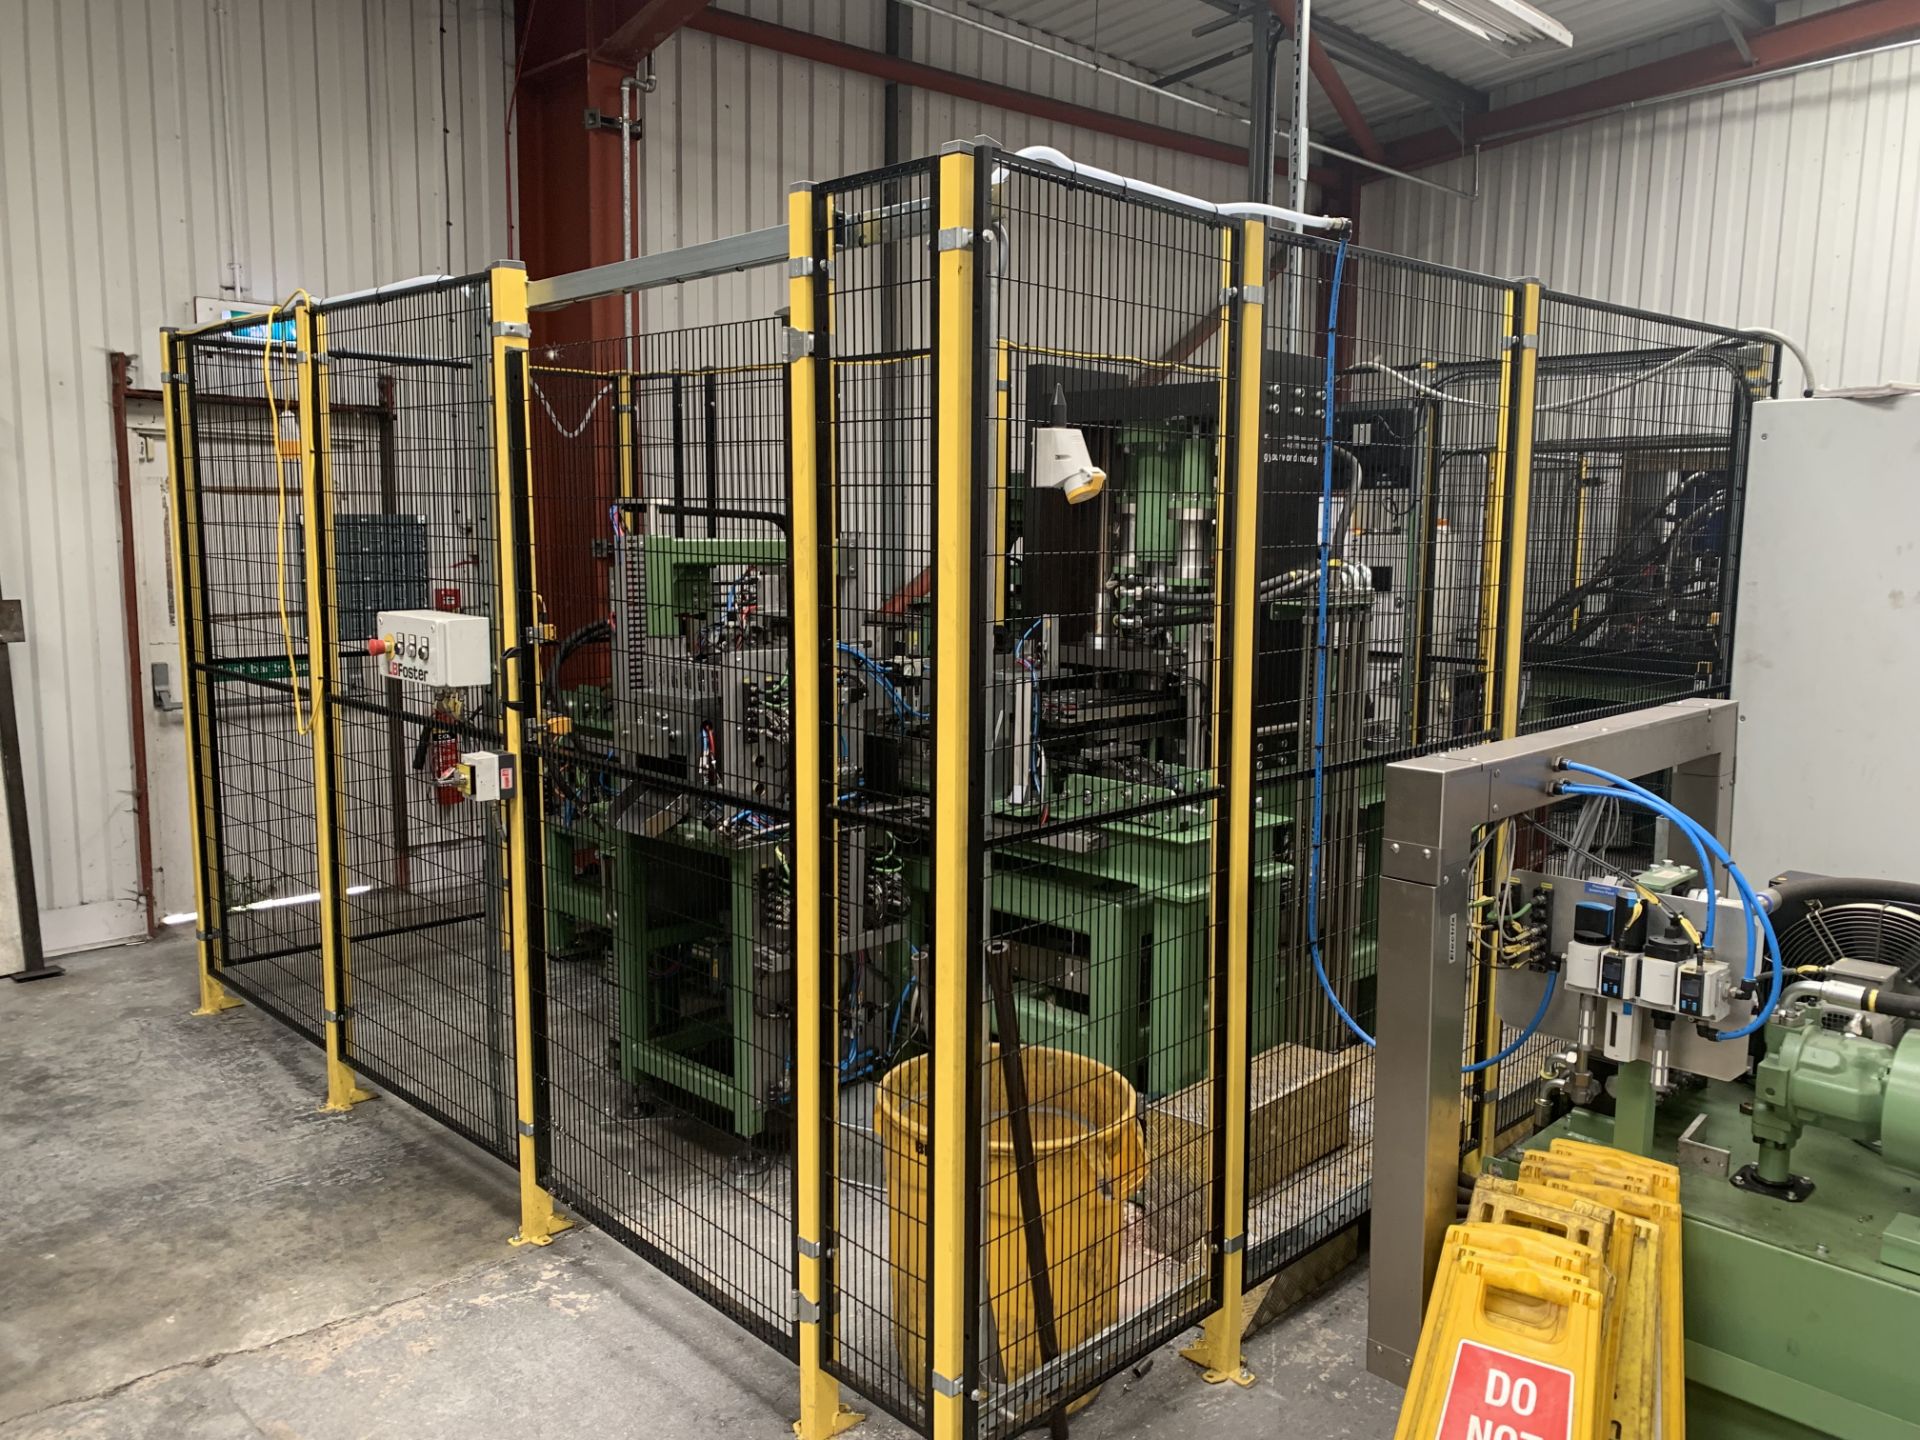 LB Foster Automation Brass Nut and Liner Forming Machine (2019), Serial Number 001